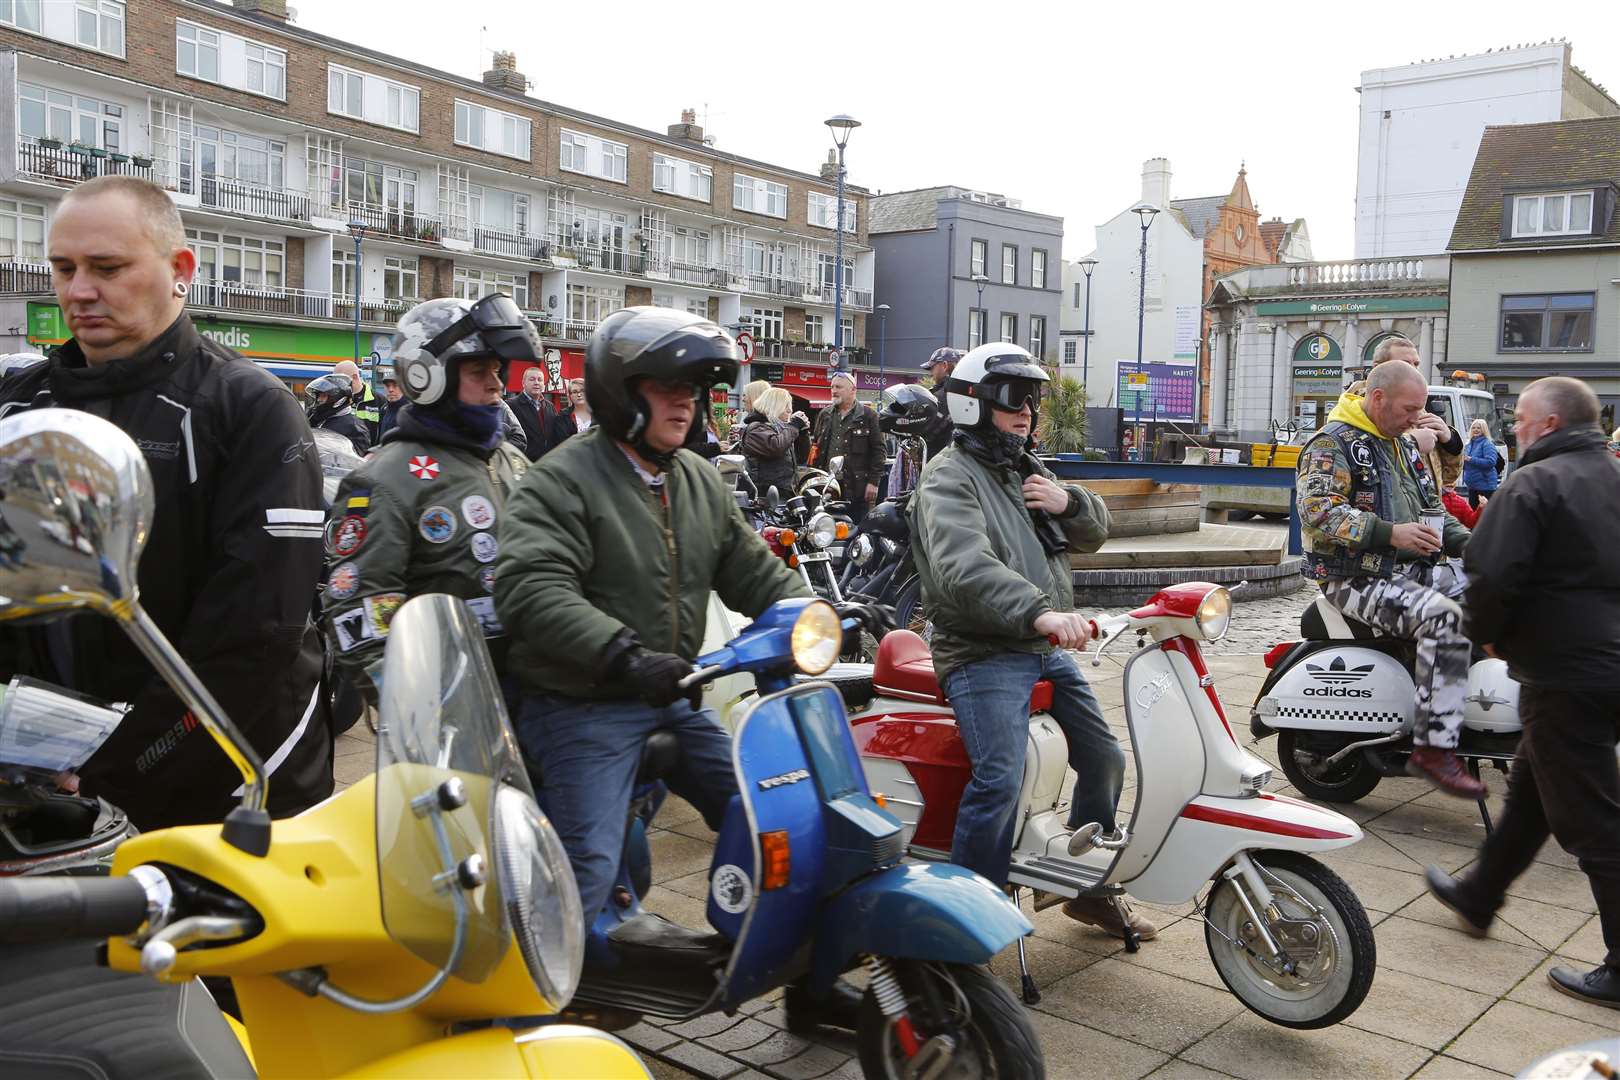 The scooter cavalcade for Kelly's funeral. Picture: Andy Jones